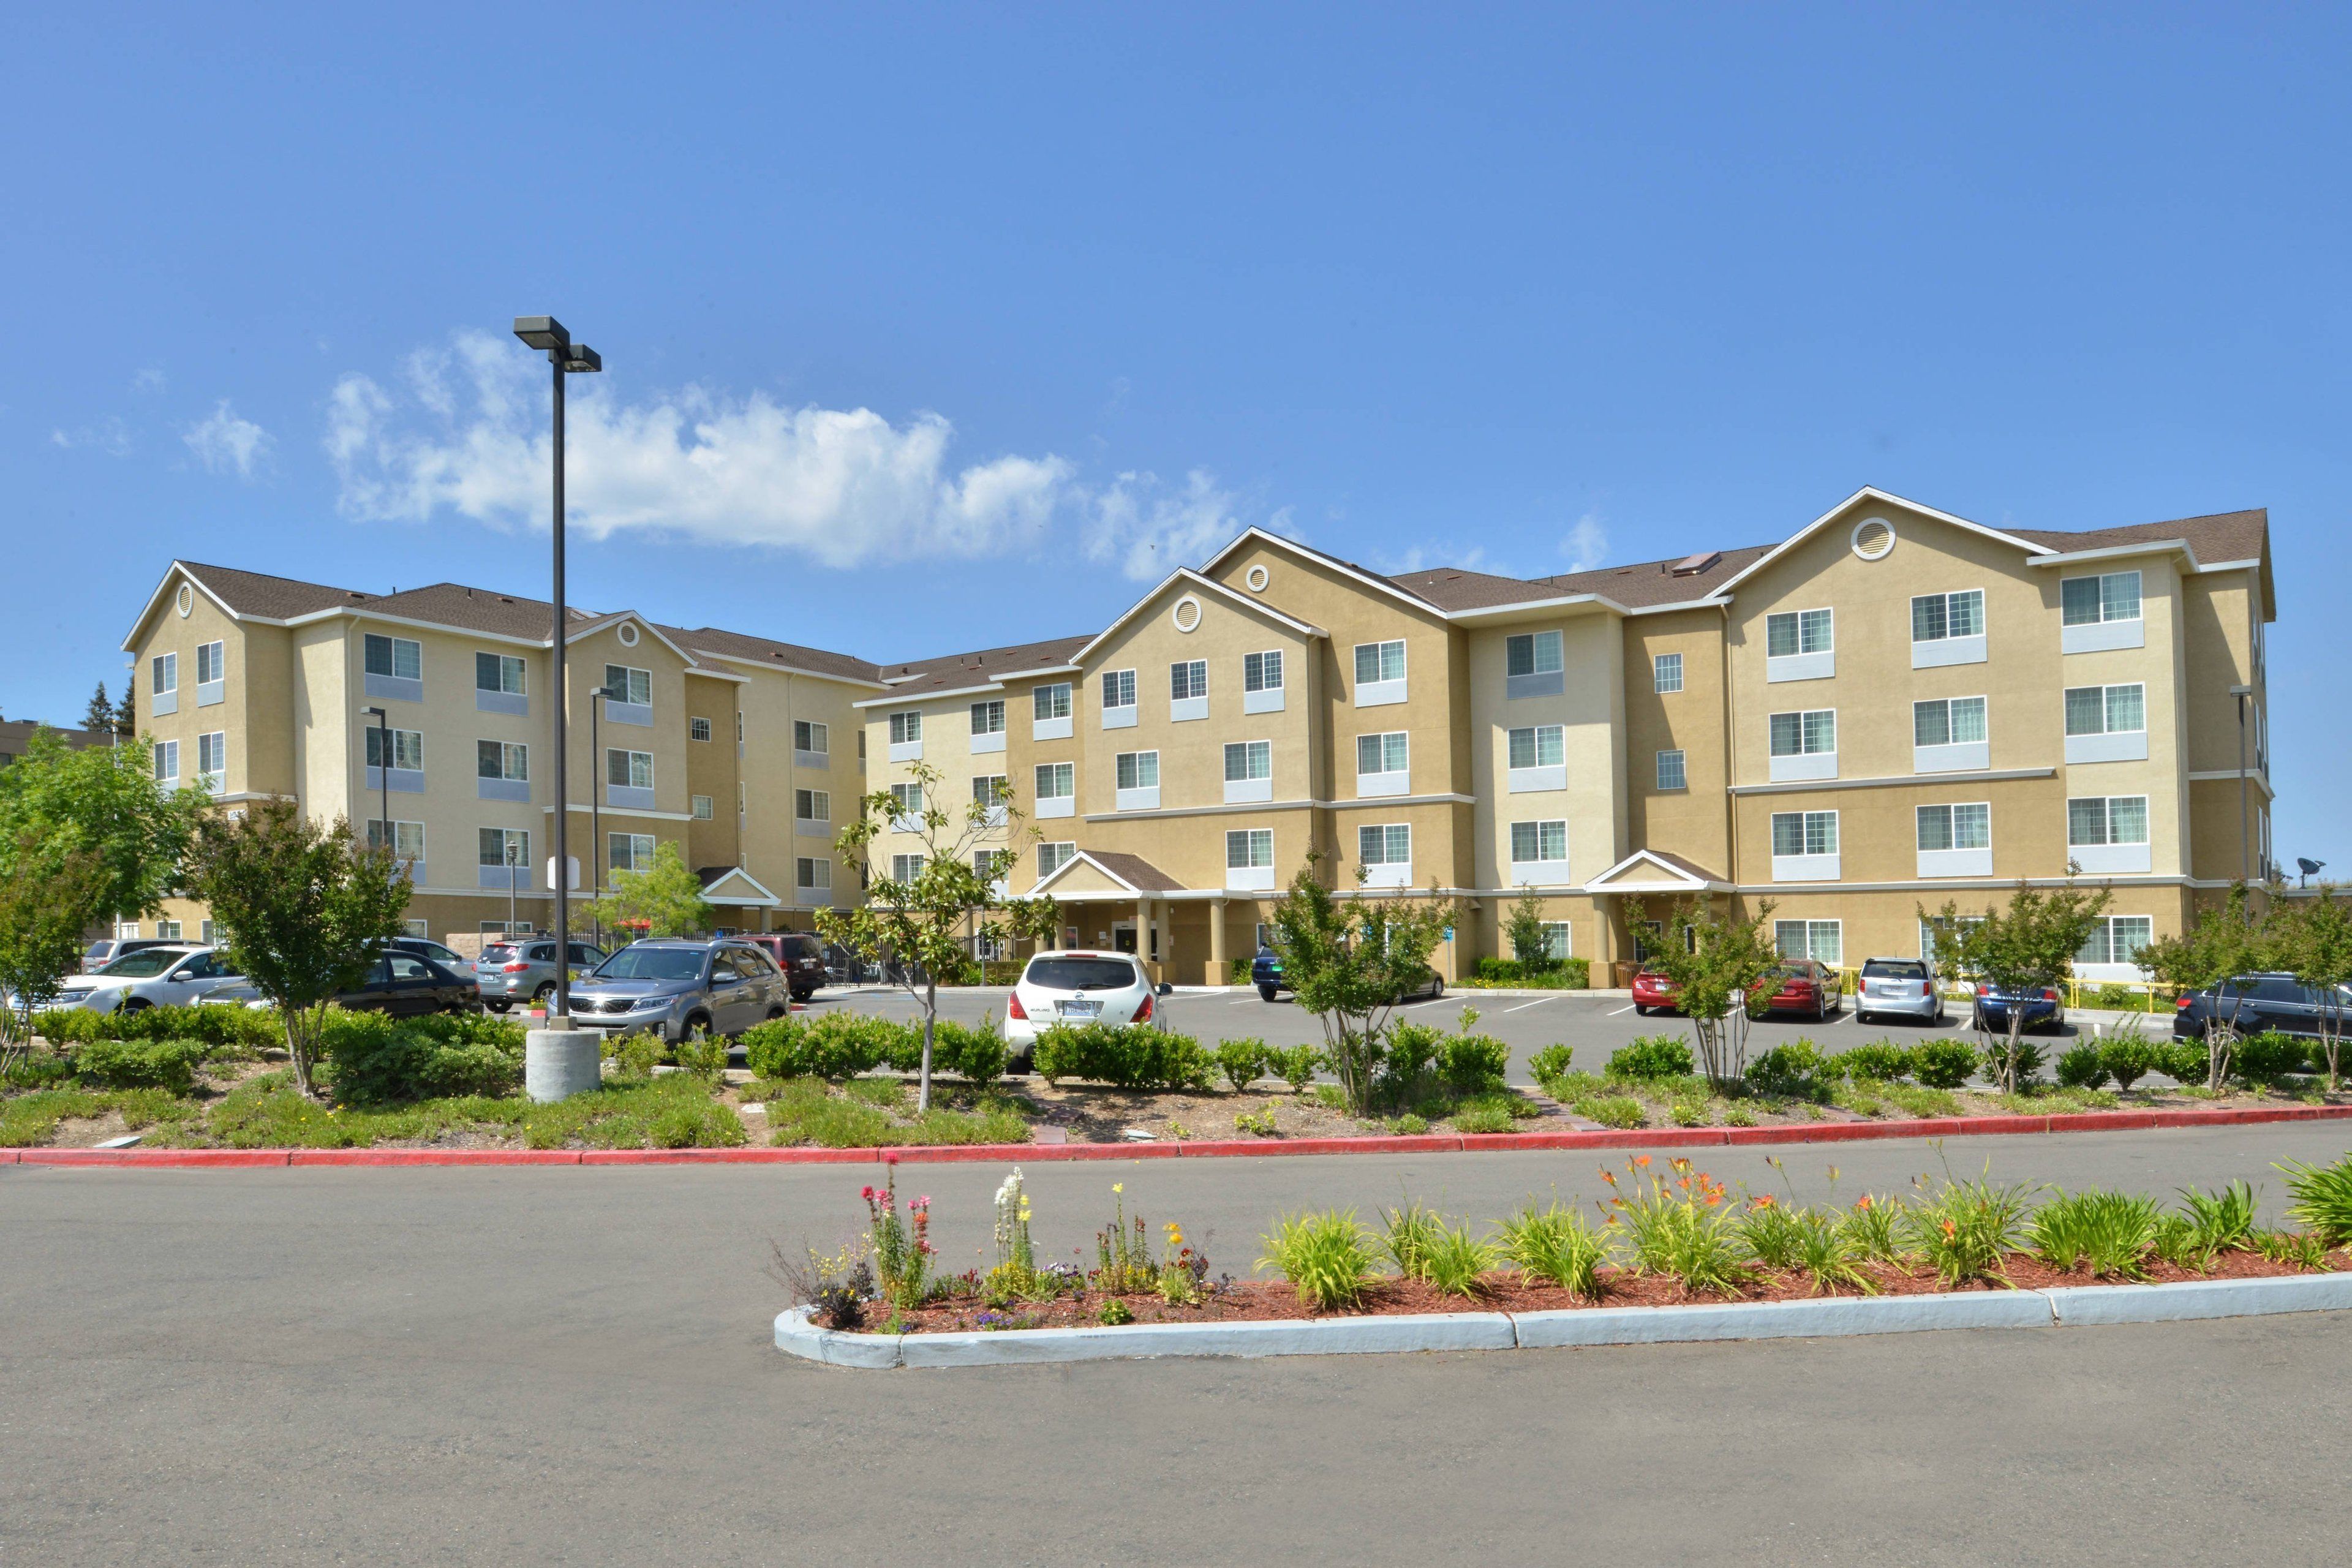 TownePlace Suites Sacramento Cal Expo